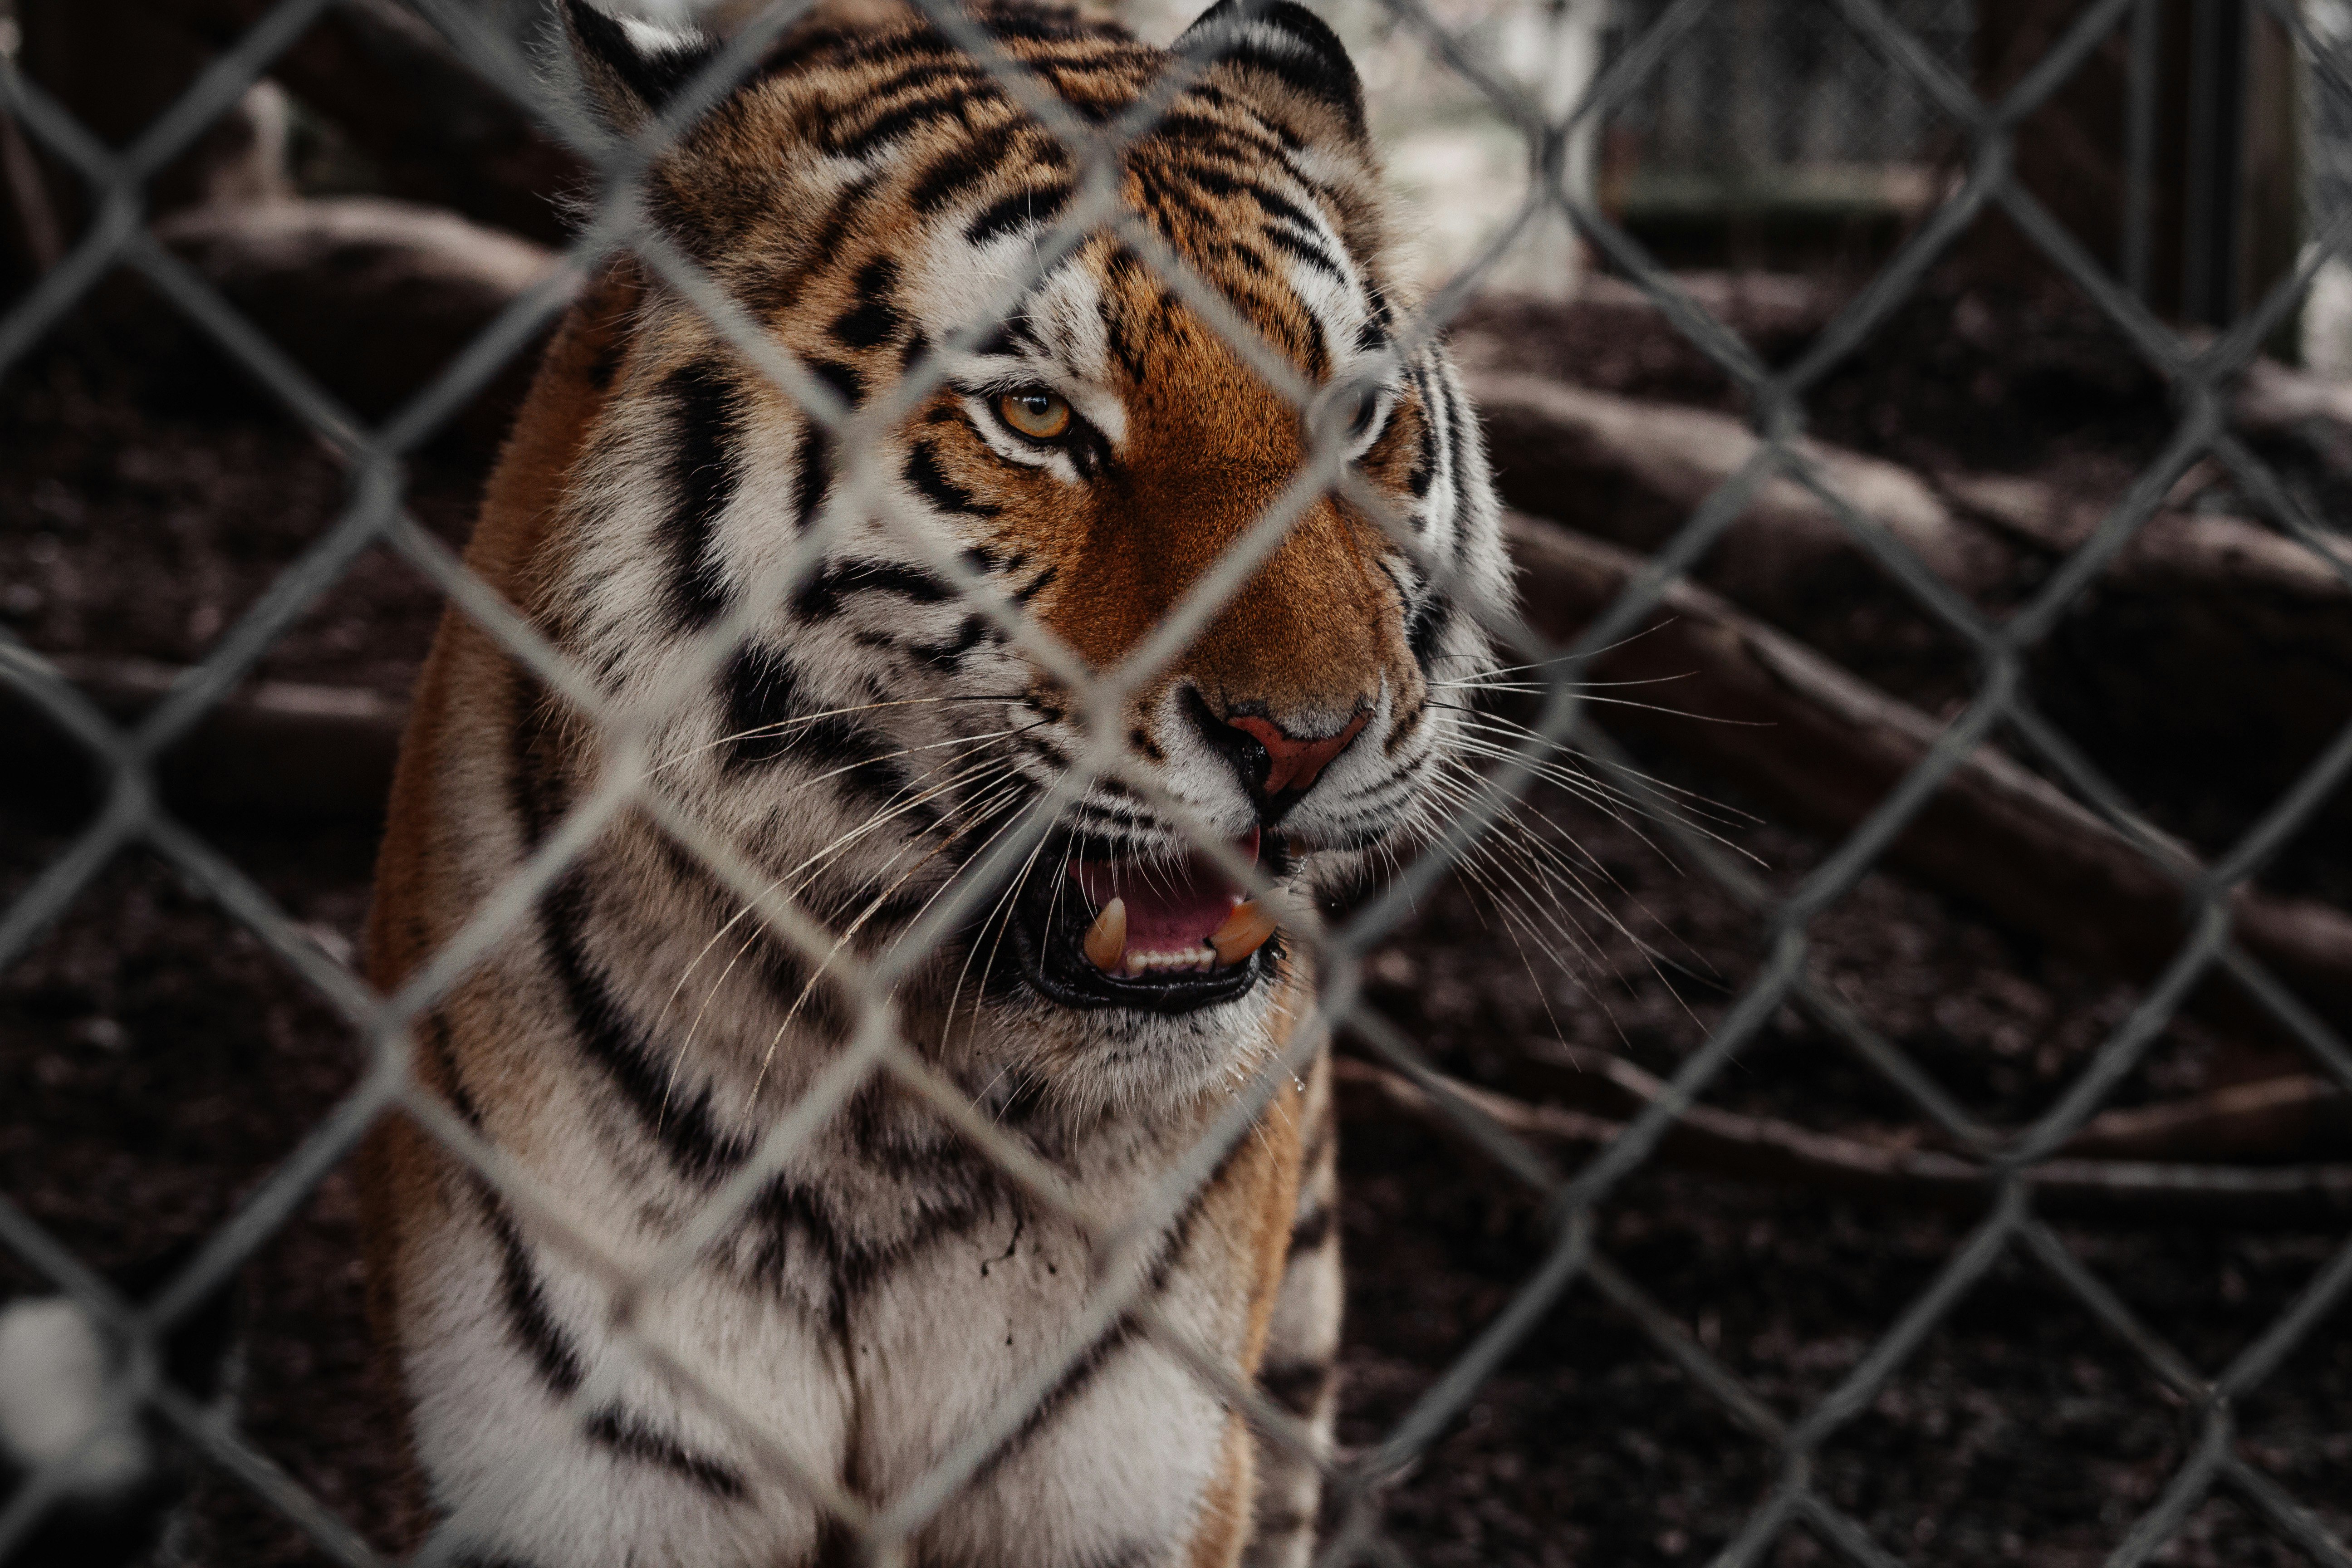 tiger on cage during daytime